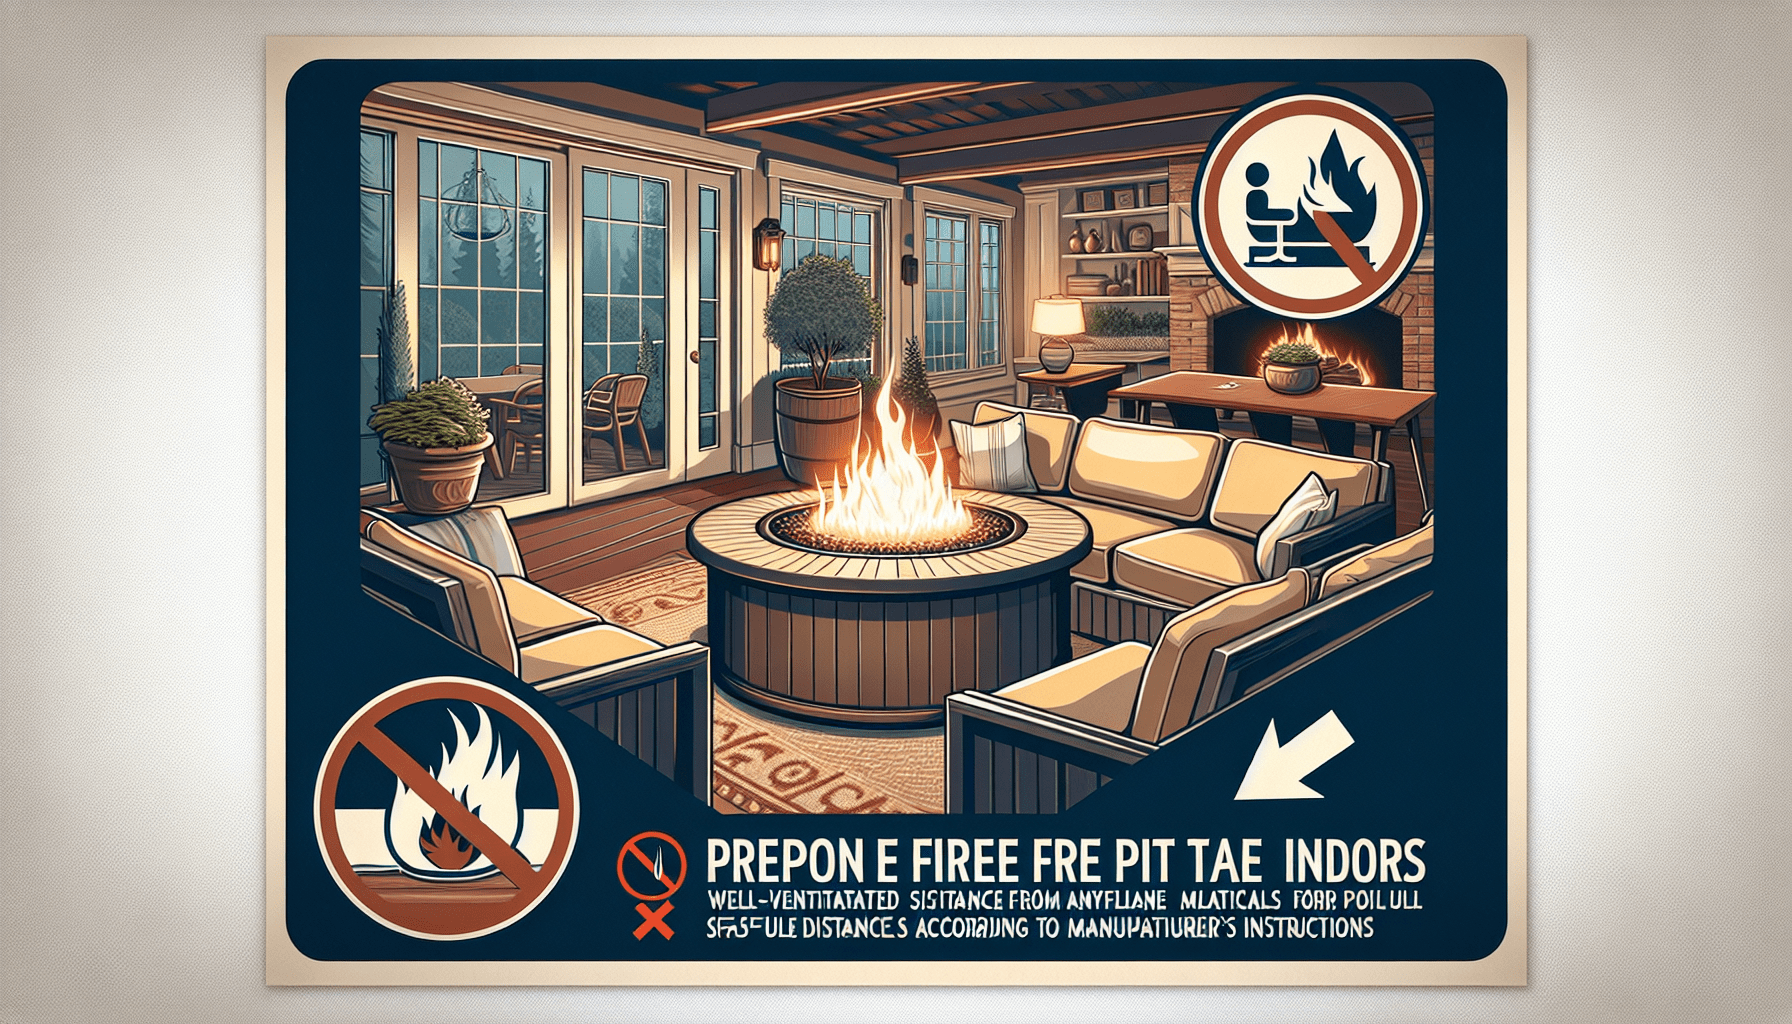 What Are The Safety Guidelines For Using Propane Fire Pit Tables Indoors?